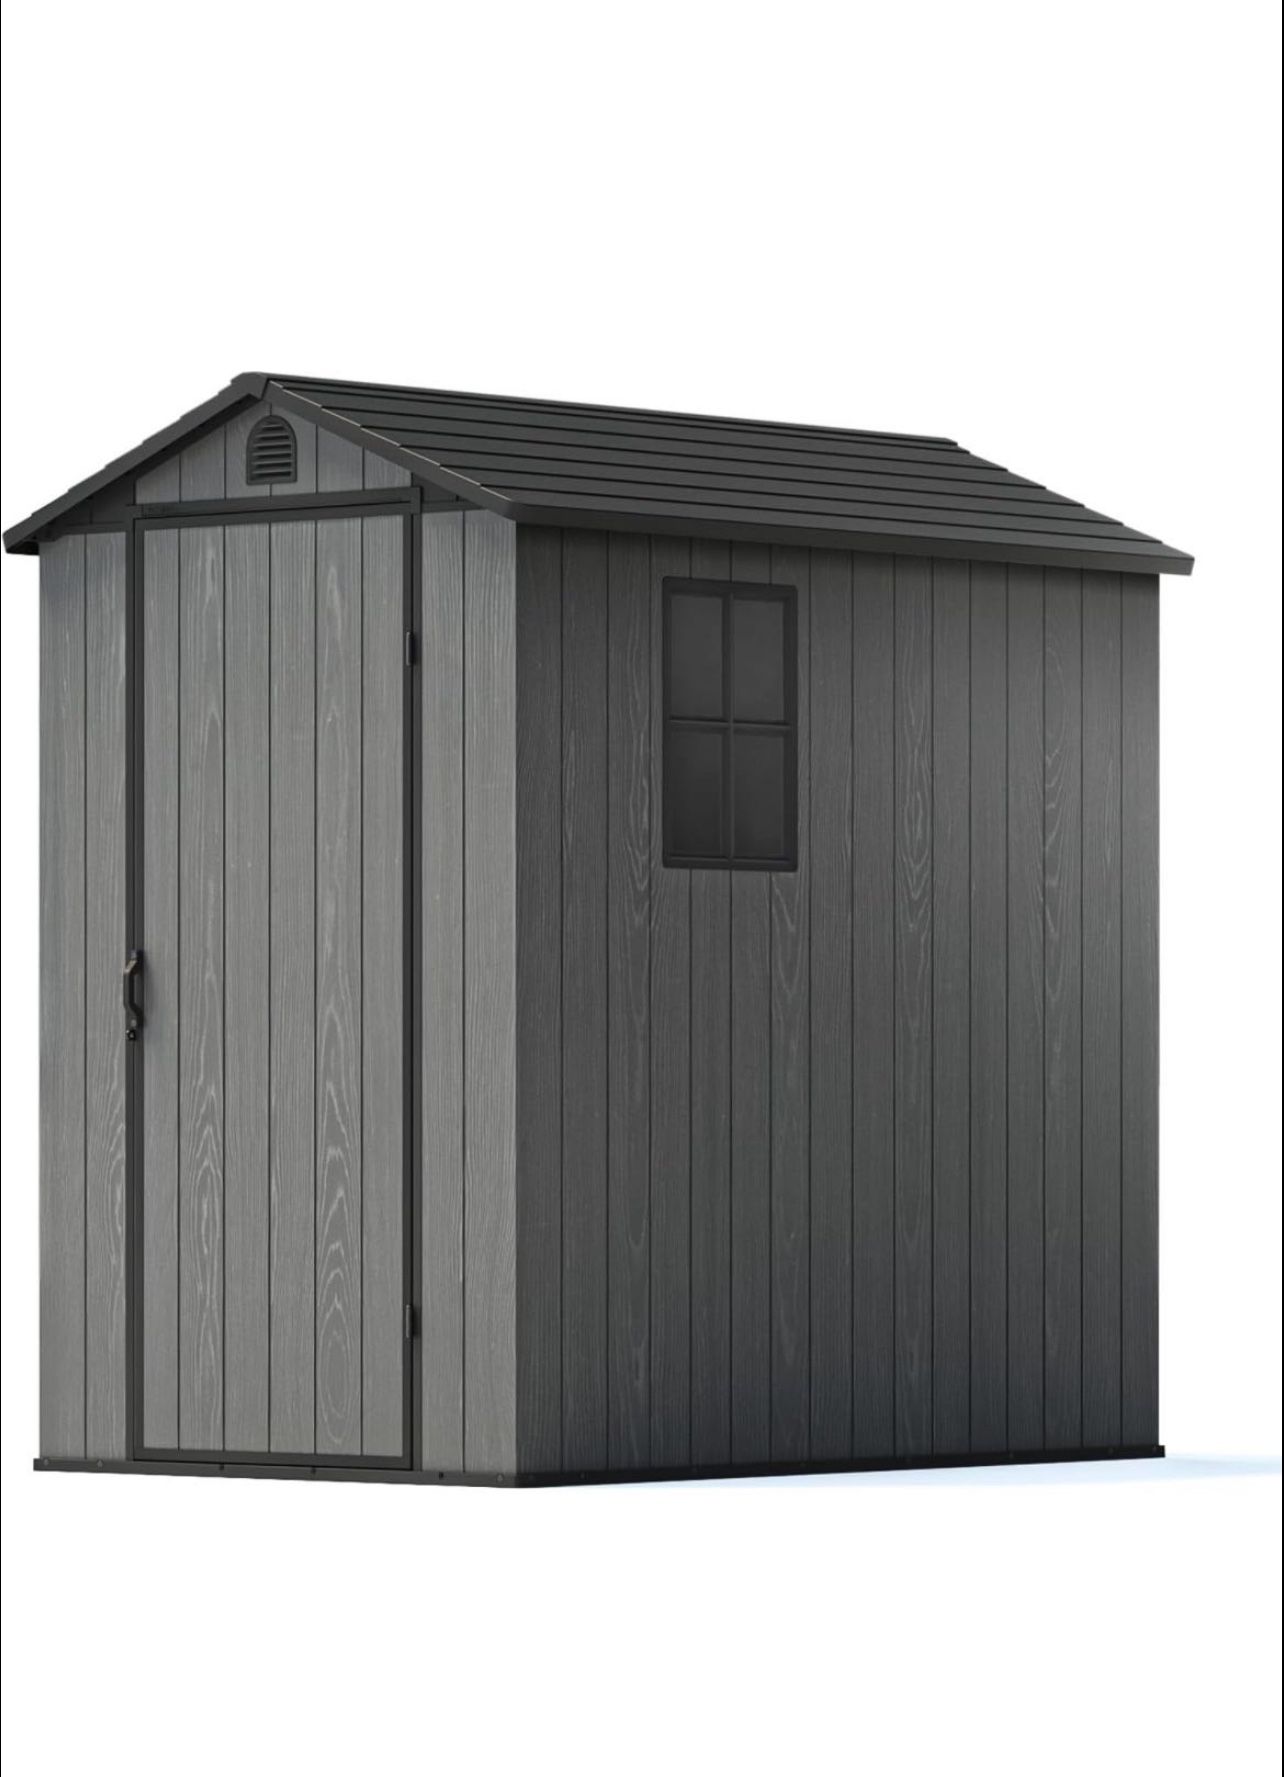 Patiowell 4X6 Plastic Shed for Outdoor Storage,Resin Shed 